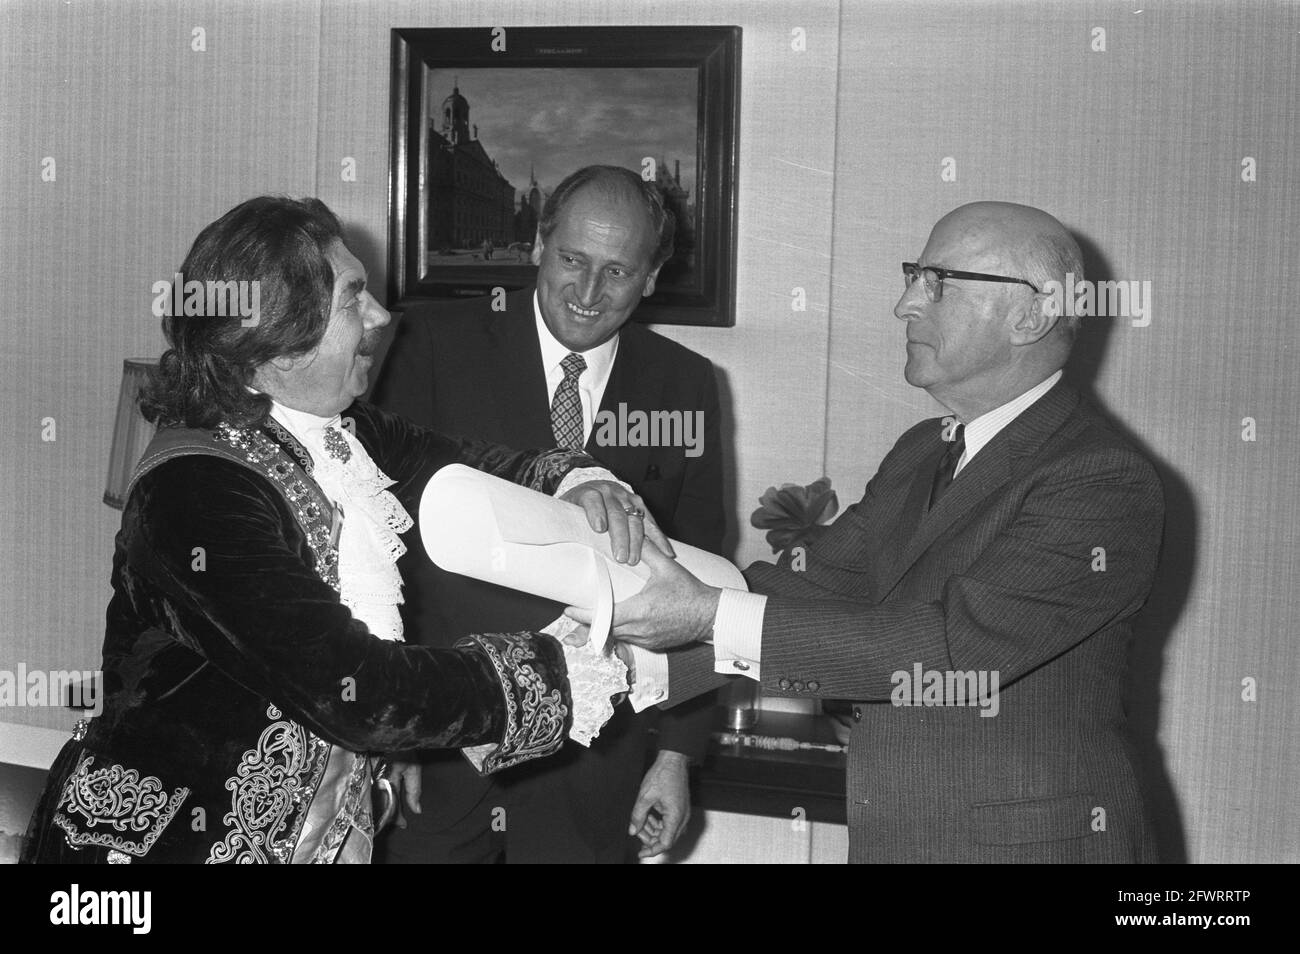 Czar Peter ( ir. K. K. van Hoffen of Stork Werkspoor Diesel) received by Mayor Samkalden at city hall, September 28, 1972, receptions, city halls, The Netherlands, 20th century press agency photo, news to remember, documentary, historic photography 1945-1990, visual stories, human history of the Twentieth Century, capturing moments in time Stock Photo